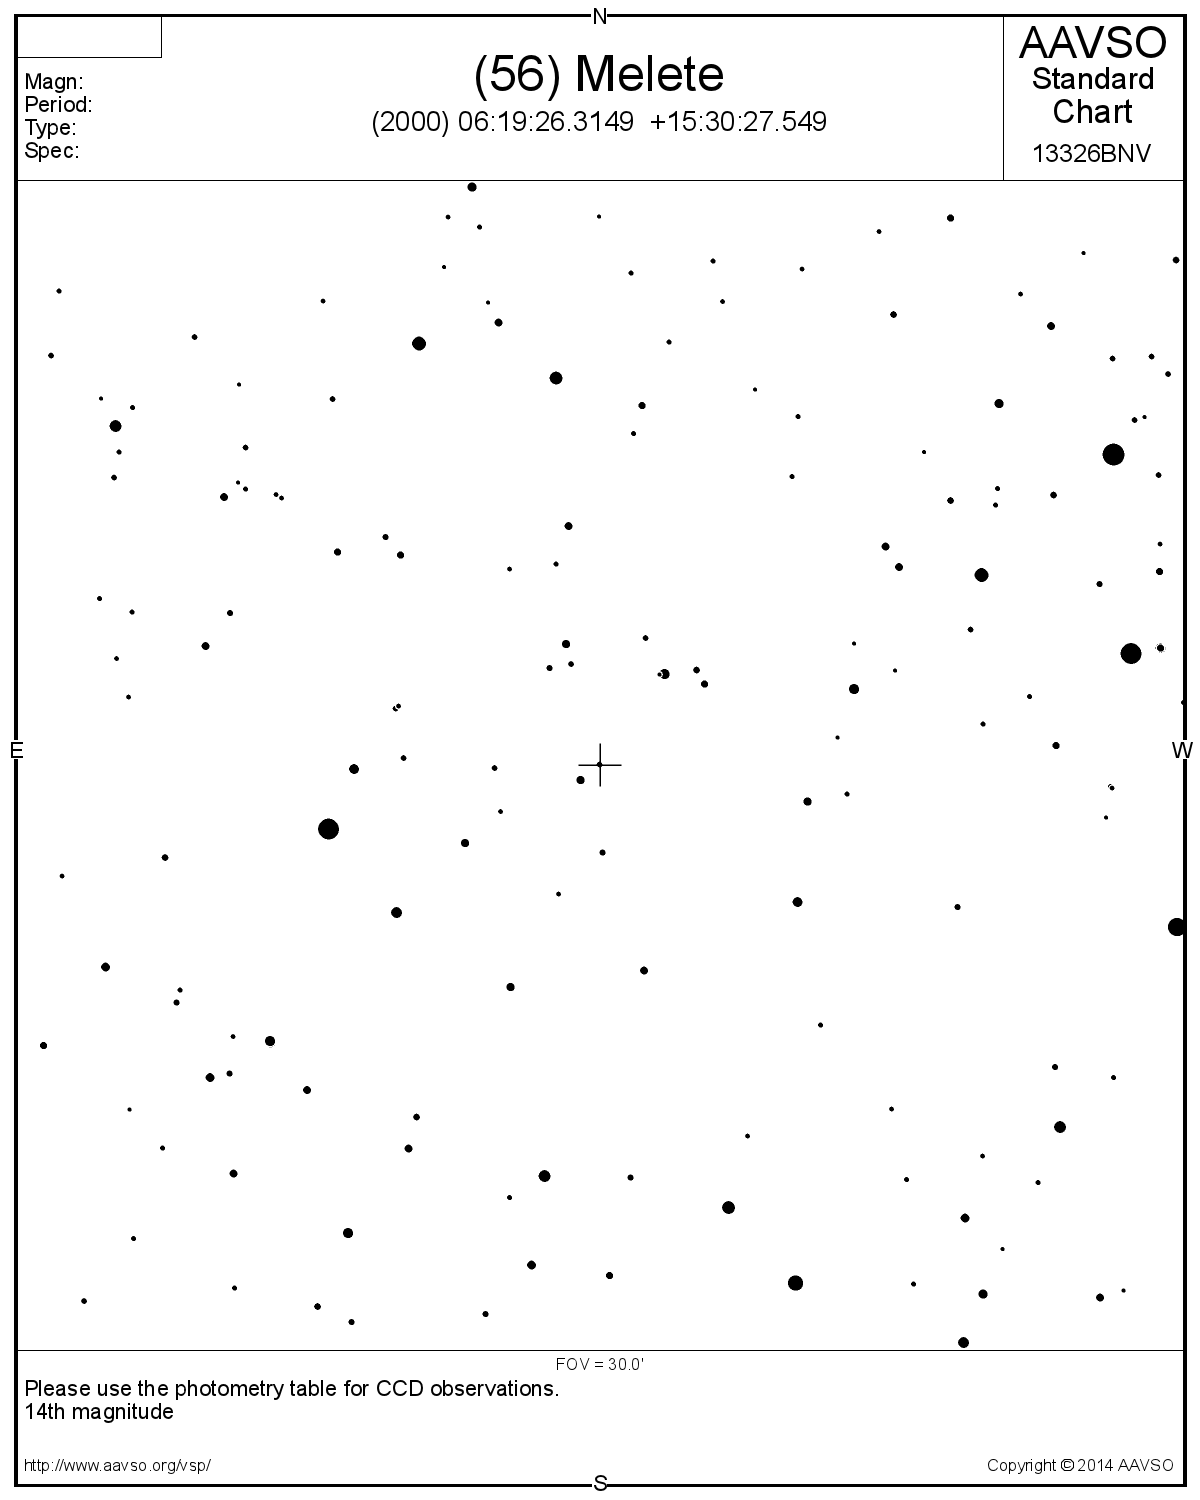 AAVSO star chart for Melete with magnitude limit of 14